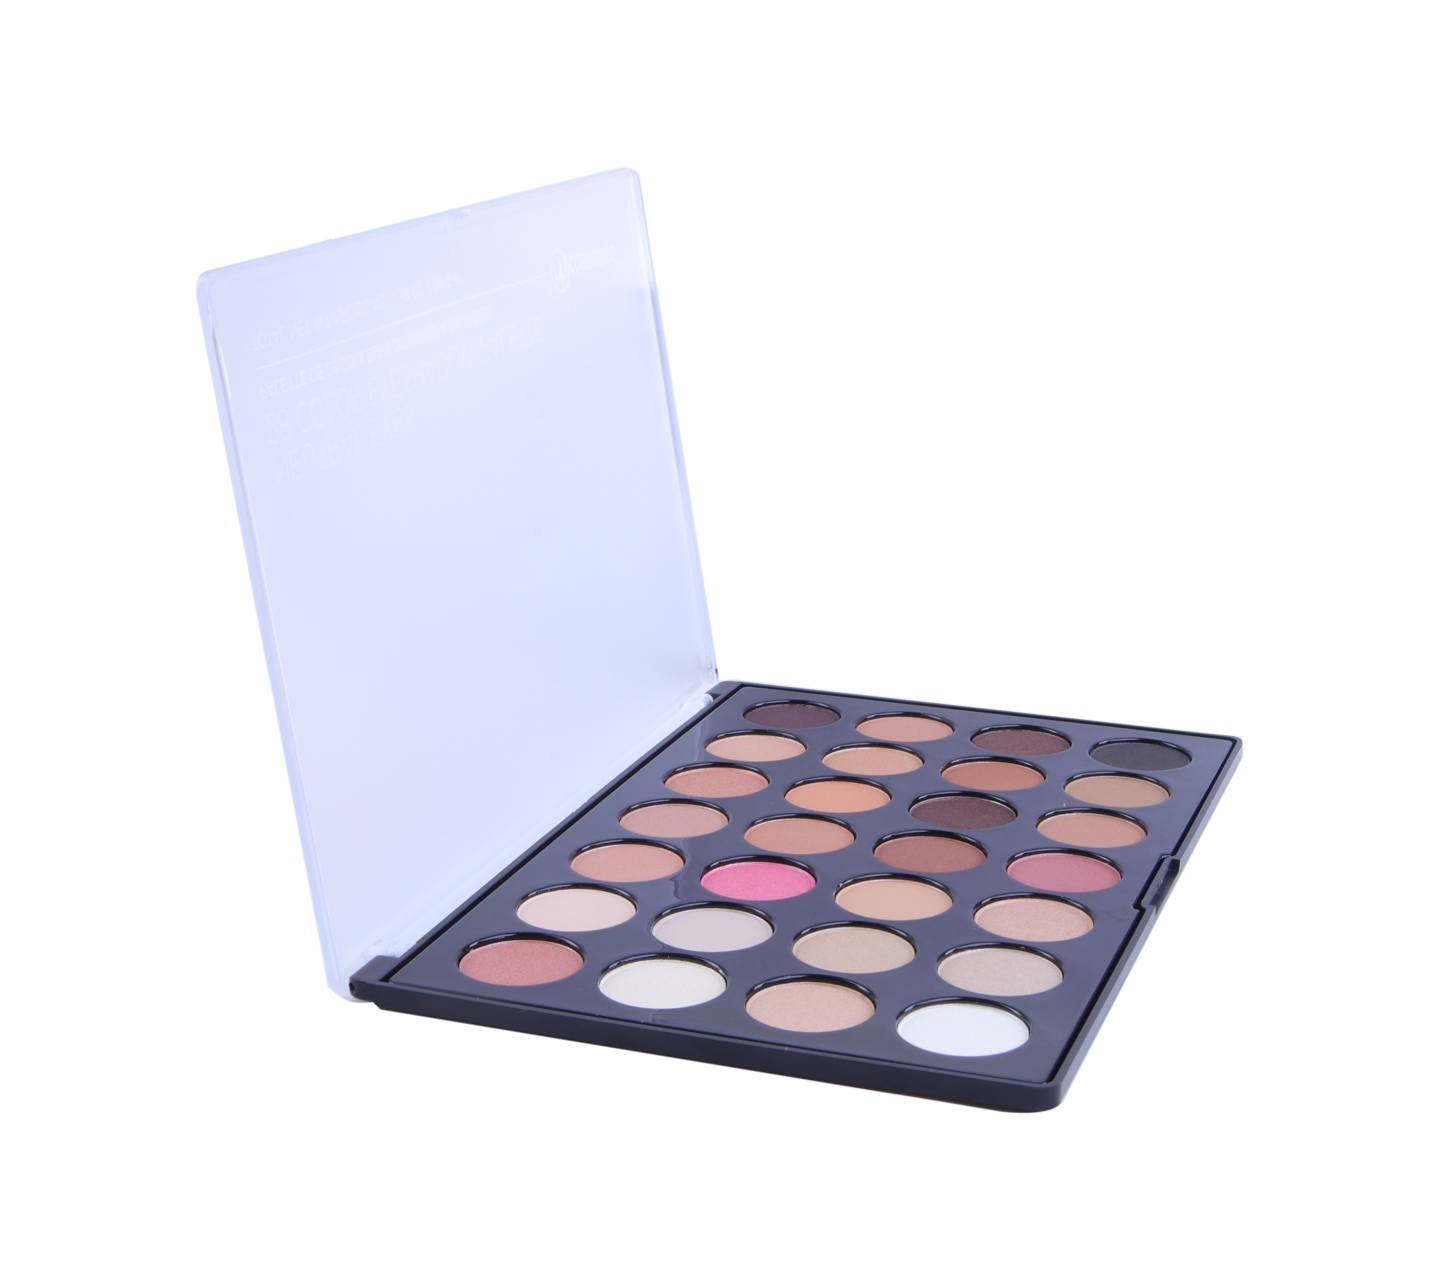 bh cosmetics Neutral Eyes 28 Color Eyeshadow Palette Sets and Palette